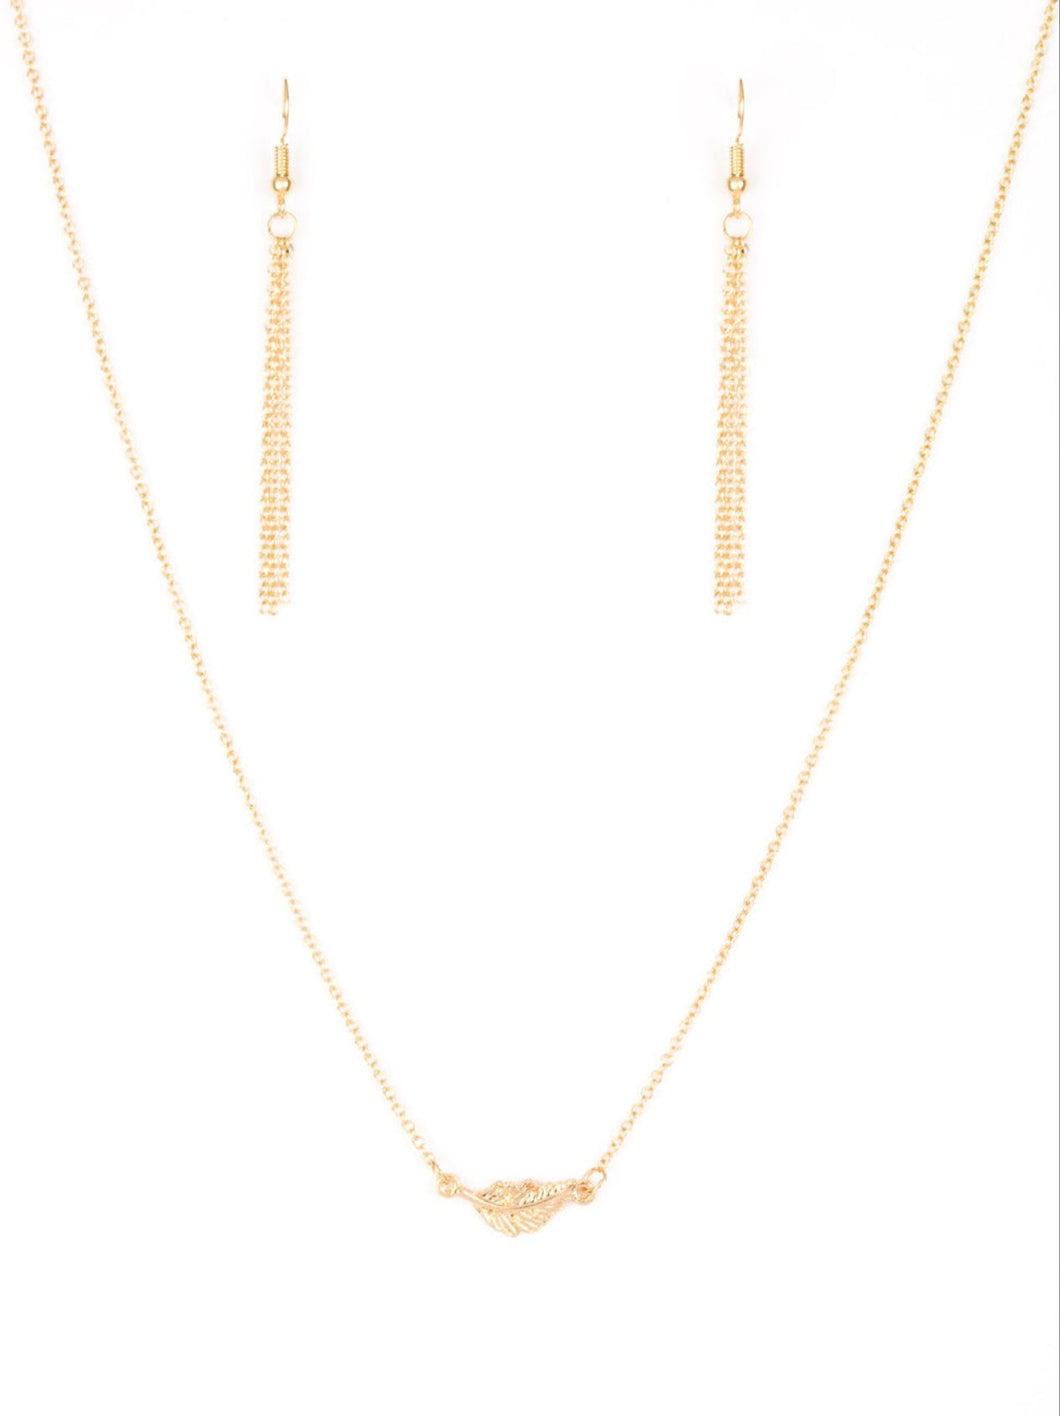 In-Flight Fashion Gold Leaf Necklace and Earrings